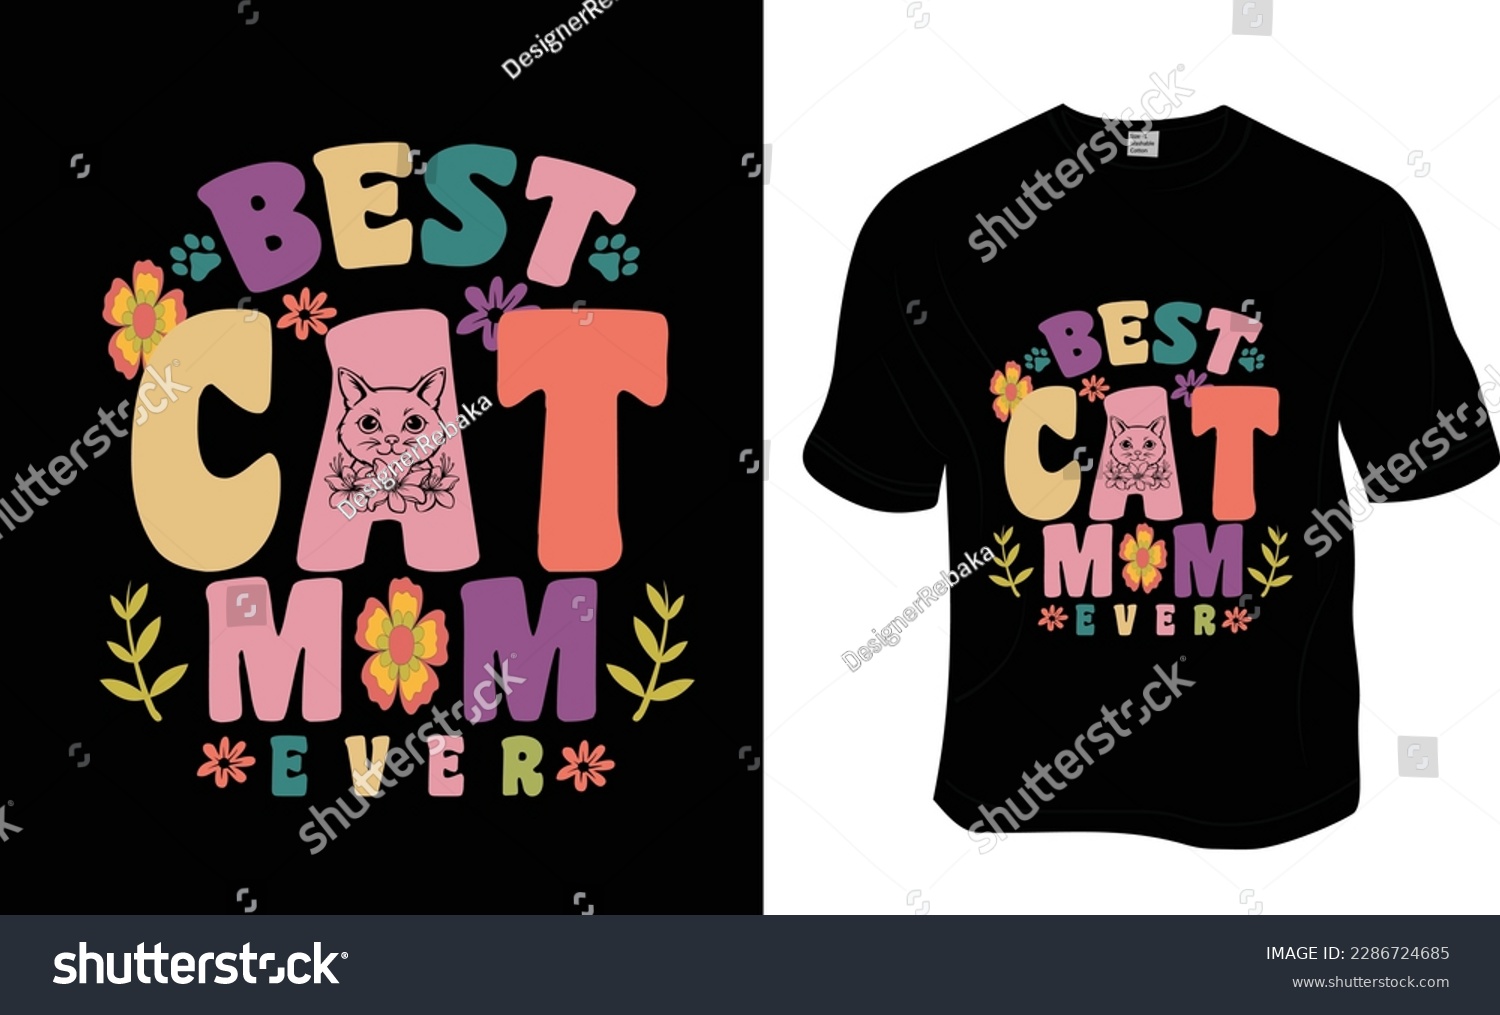 SVG of best cat mom ever, Retro wavy, Groovy pet lover, cat lover T-shirt Design.Ready to print for apparel, poster, and illustration. Modern, simple, lettering.

 svg